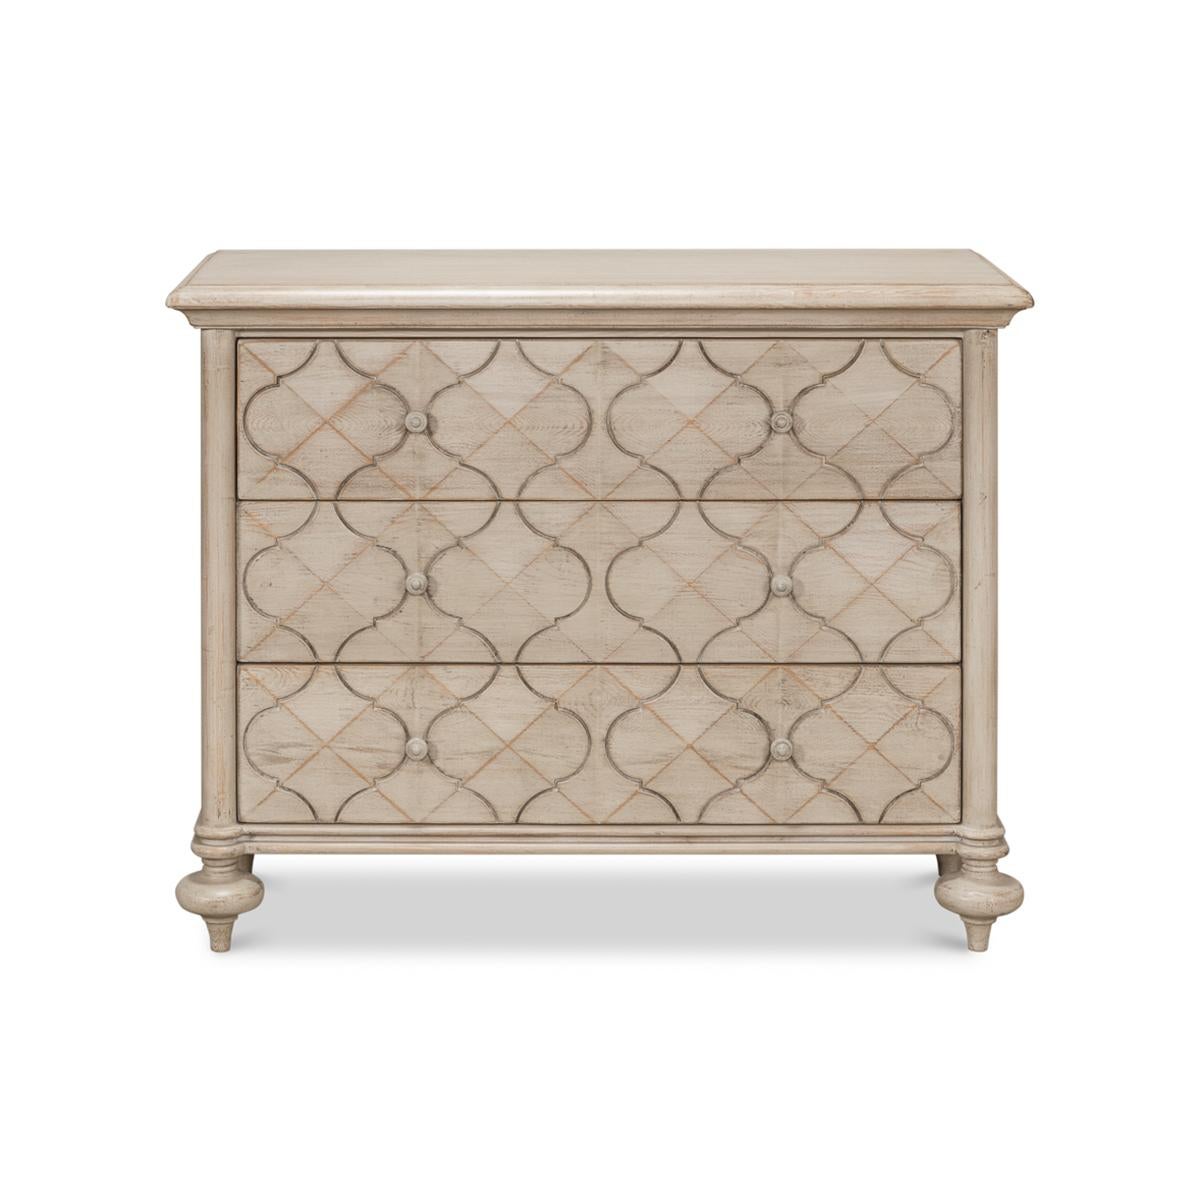 Pine wood painted three-drawer dresser in a stone-grey antiqued finish. With a rectangular molded edge raised on turned taupee feet.

Dimensions: 44